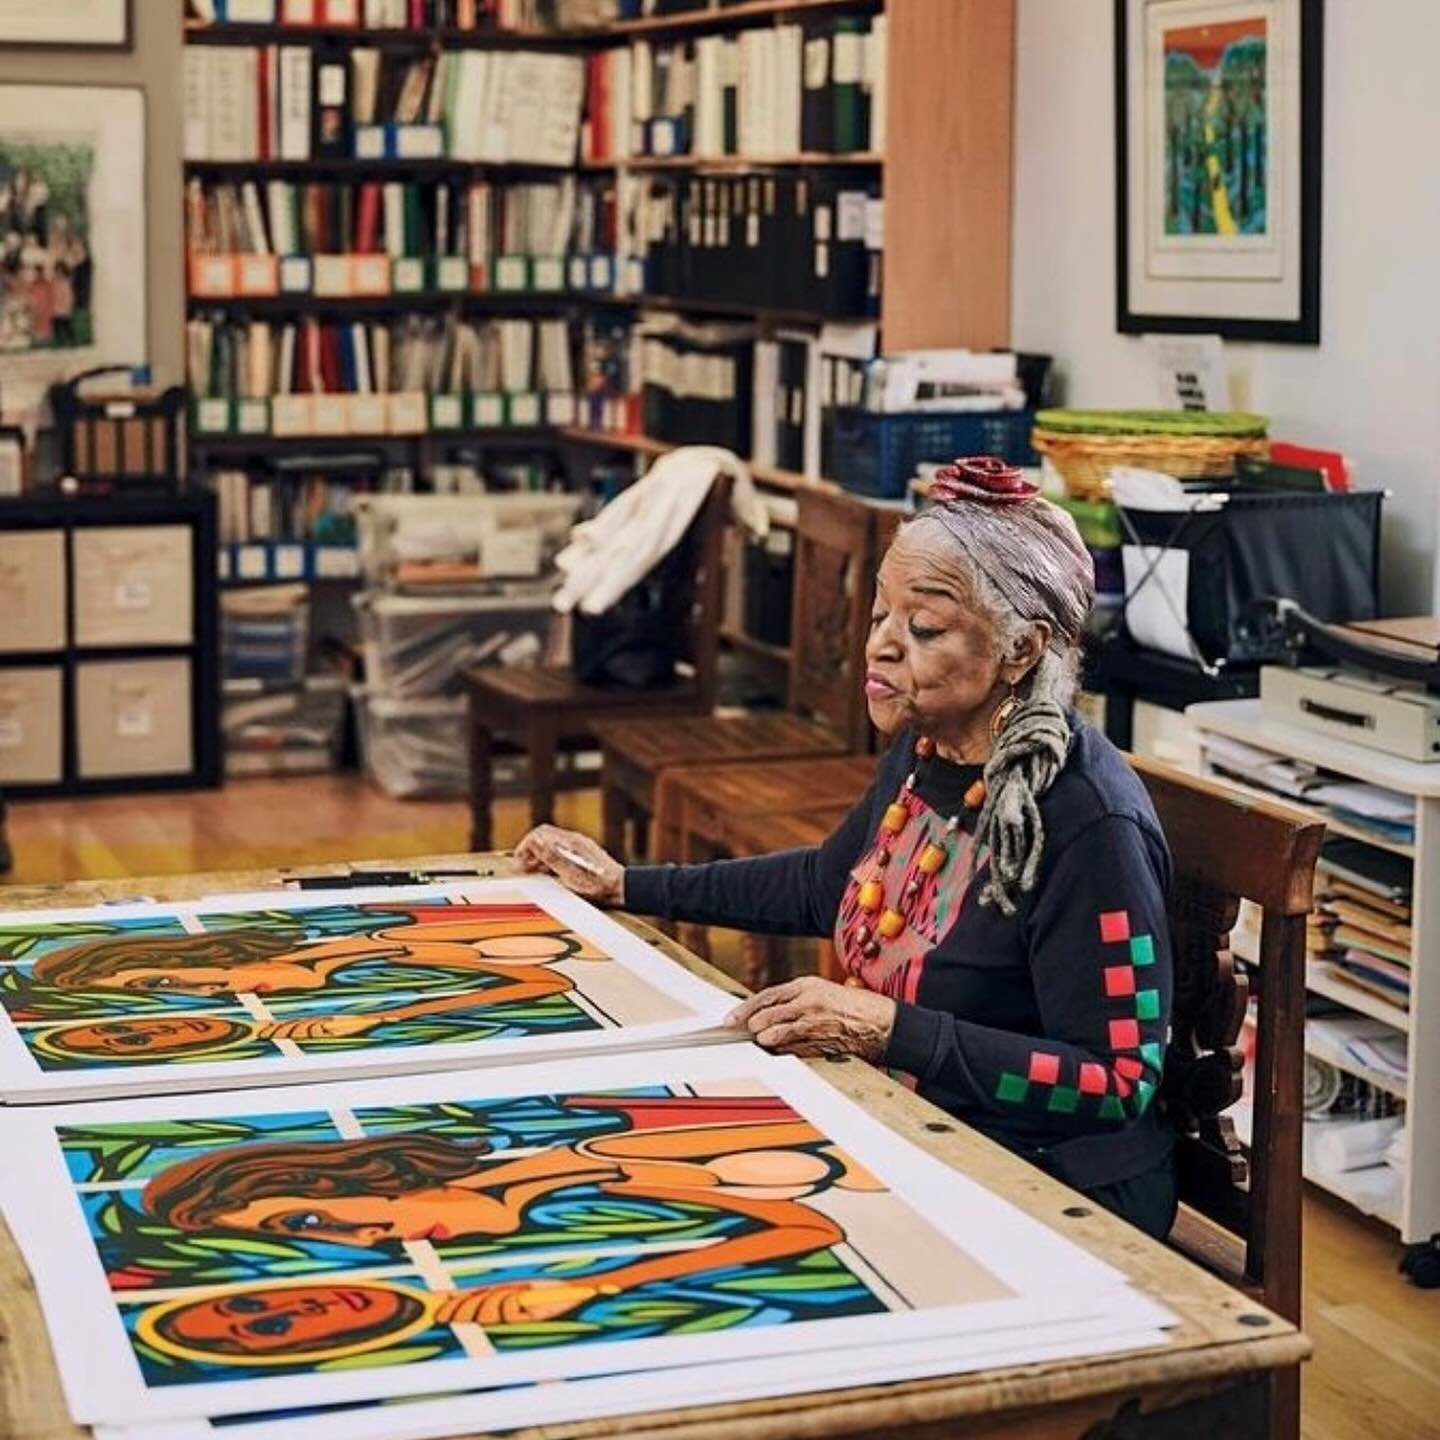 When we say Betti Ono represents and embodies &ldquo;A BOLD manifestation of liberation and power&rdquo; - we are referring to mixed media sculpter, painter, quilter, performing artist, activist and author FAITH RINGGOLD! Never defined by one medium,